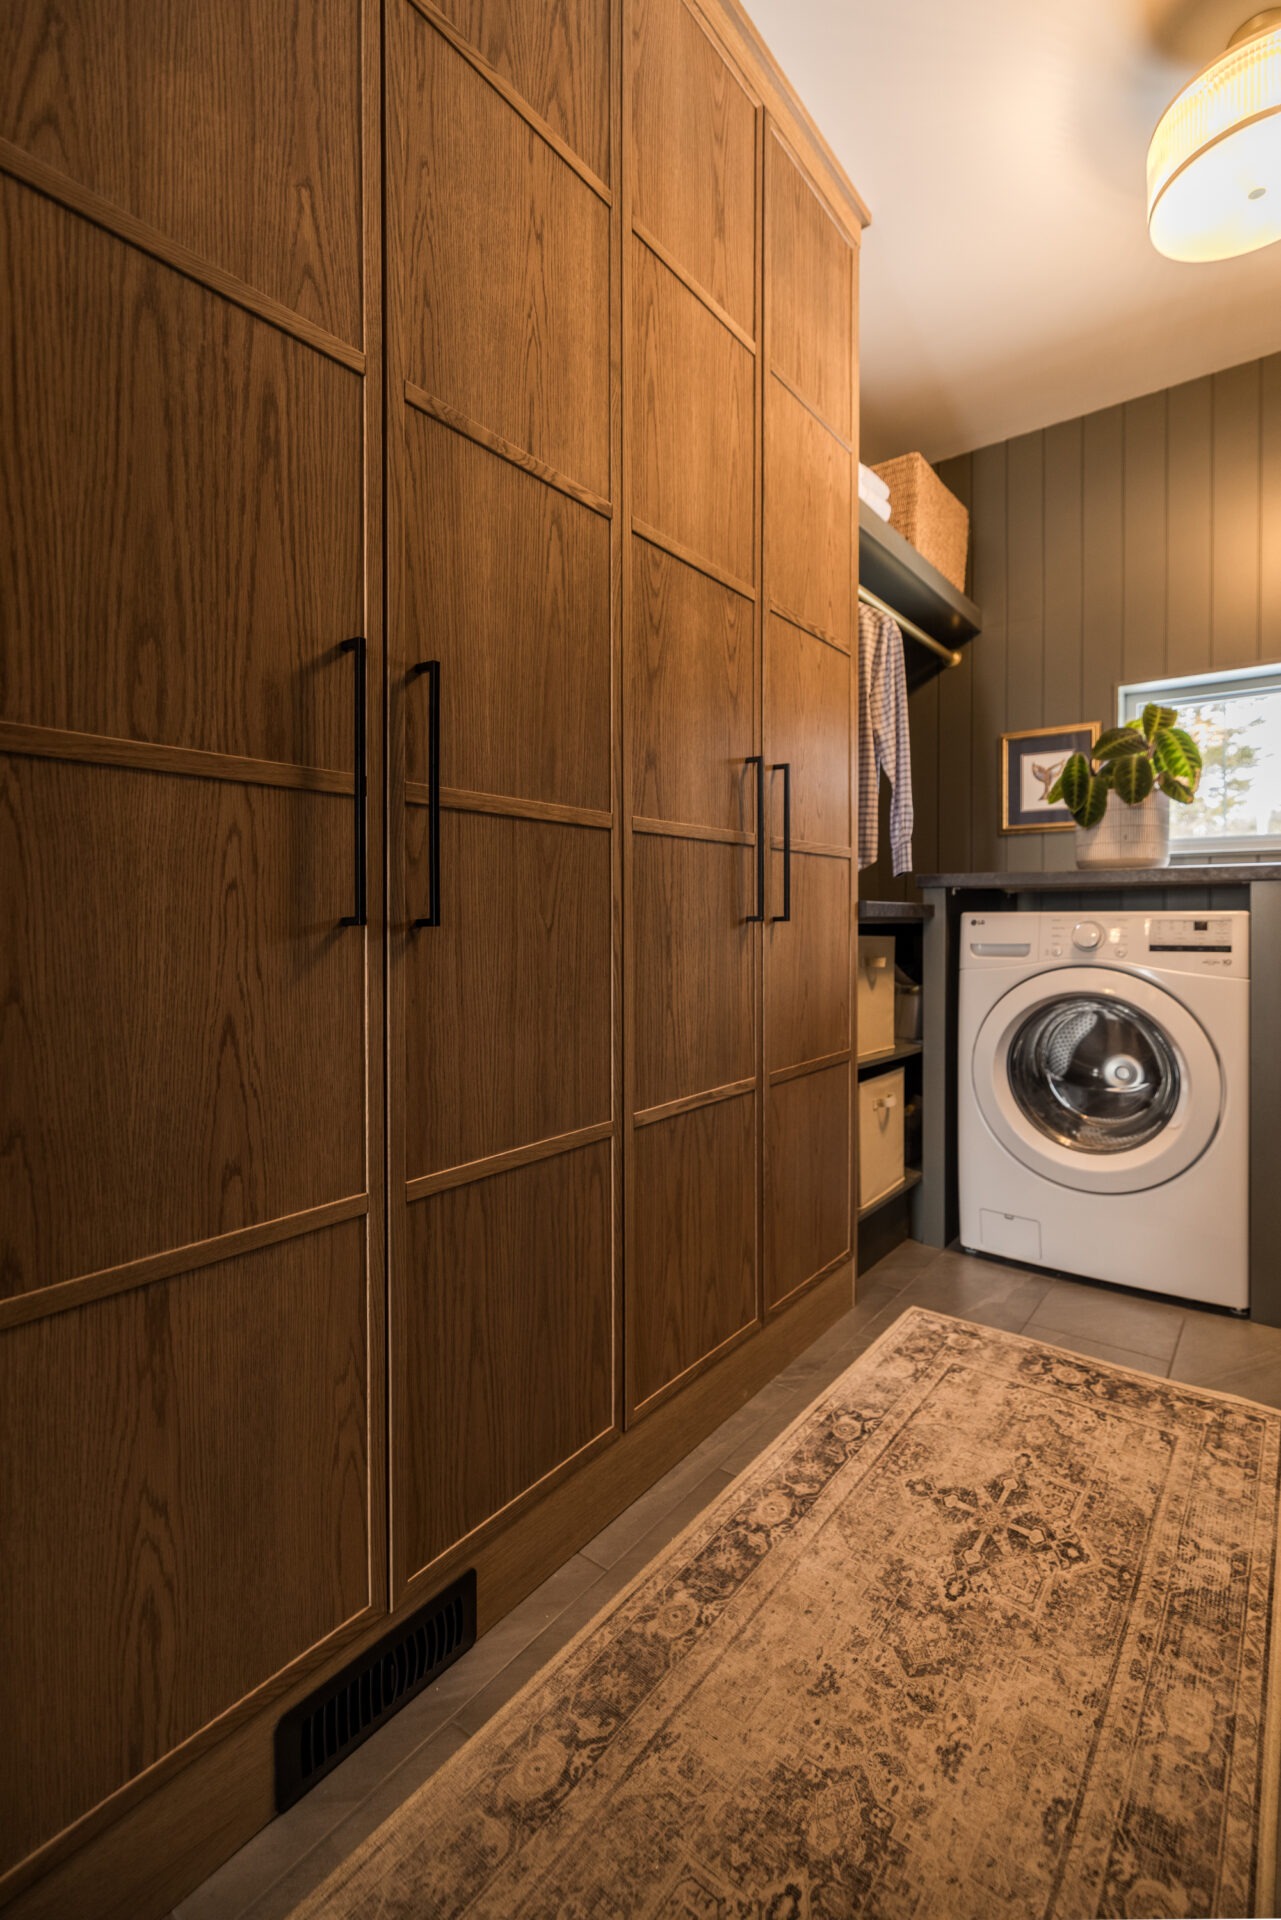 An interior space featuring tall wooden cabinetry with black handles, a front-loading washing machine to the right, a patterned rug on the floor, and a small window.